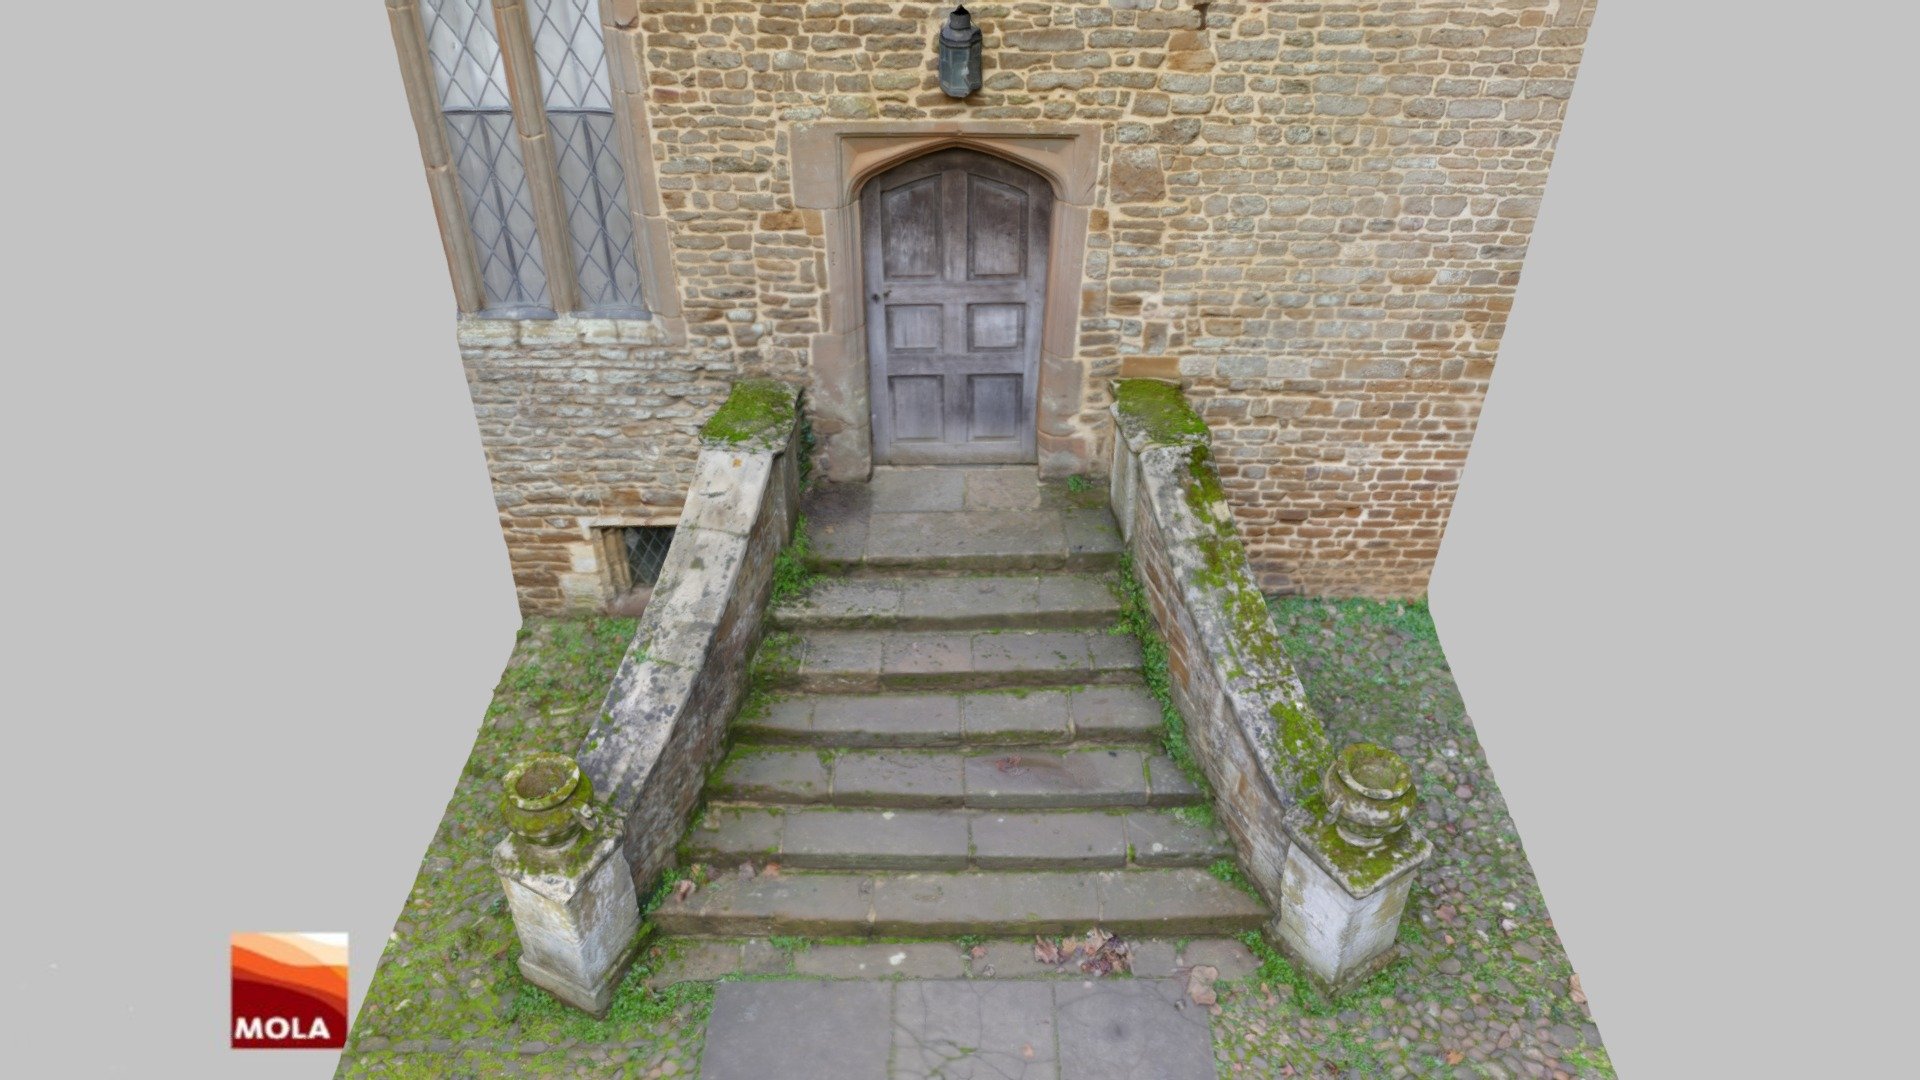 Door to the Great Hall, Canons Ashby